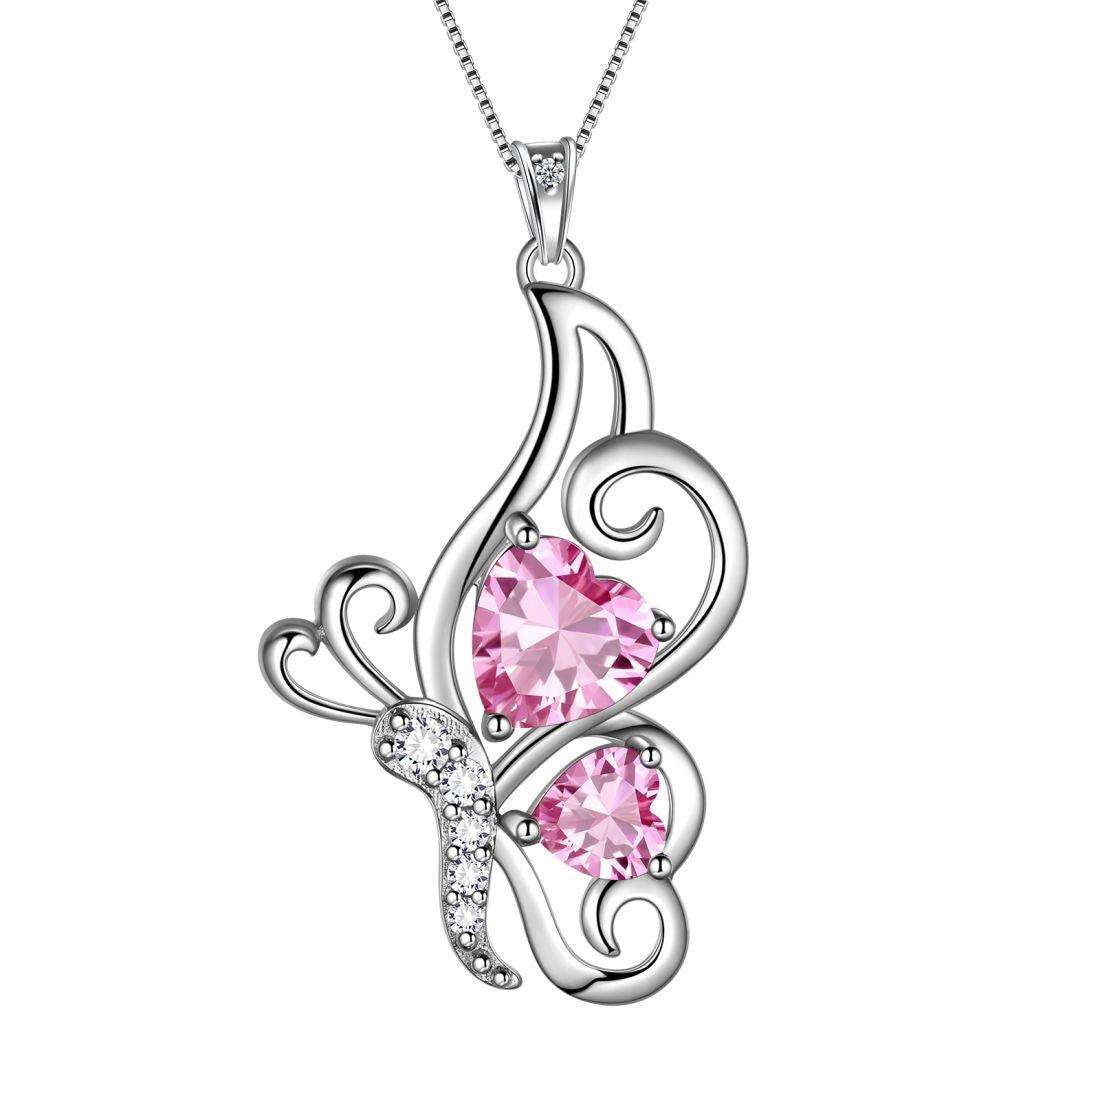 Butterfly Birthstone October Tourmaline Necklace Sterling Silver - Necklaces - Aurora Tears